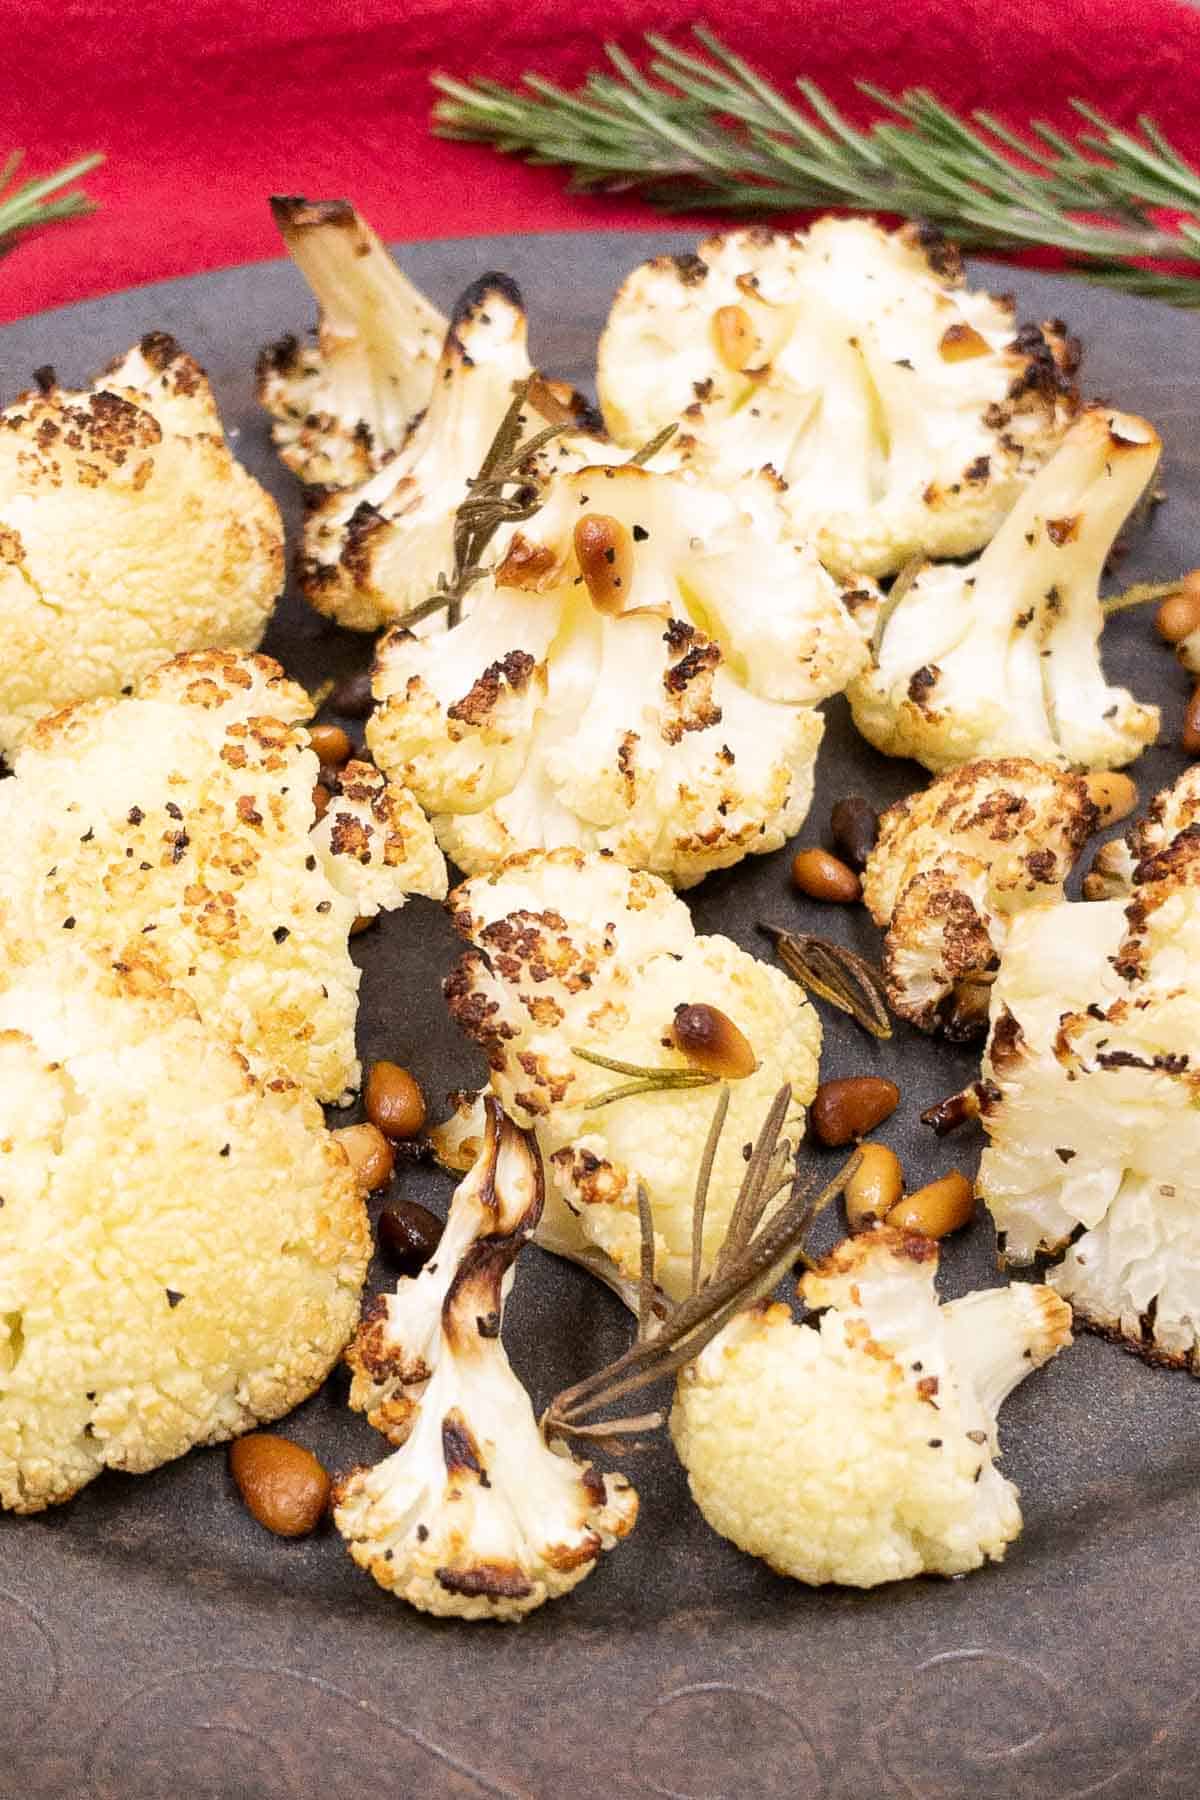 A dish of delicious roasted cauliflower with rosemary and pine nuts.